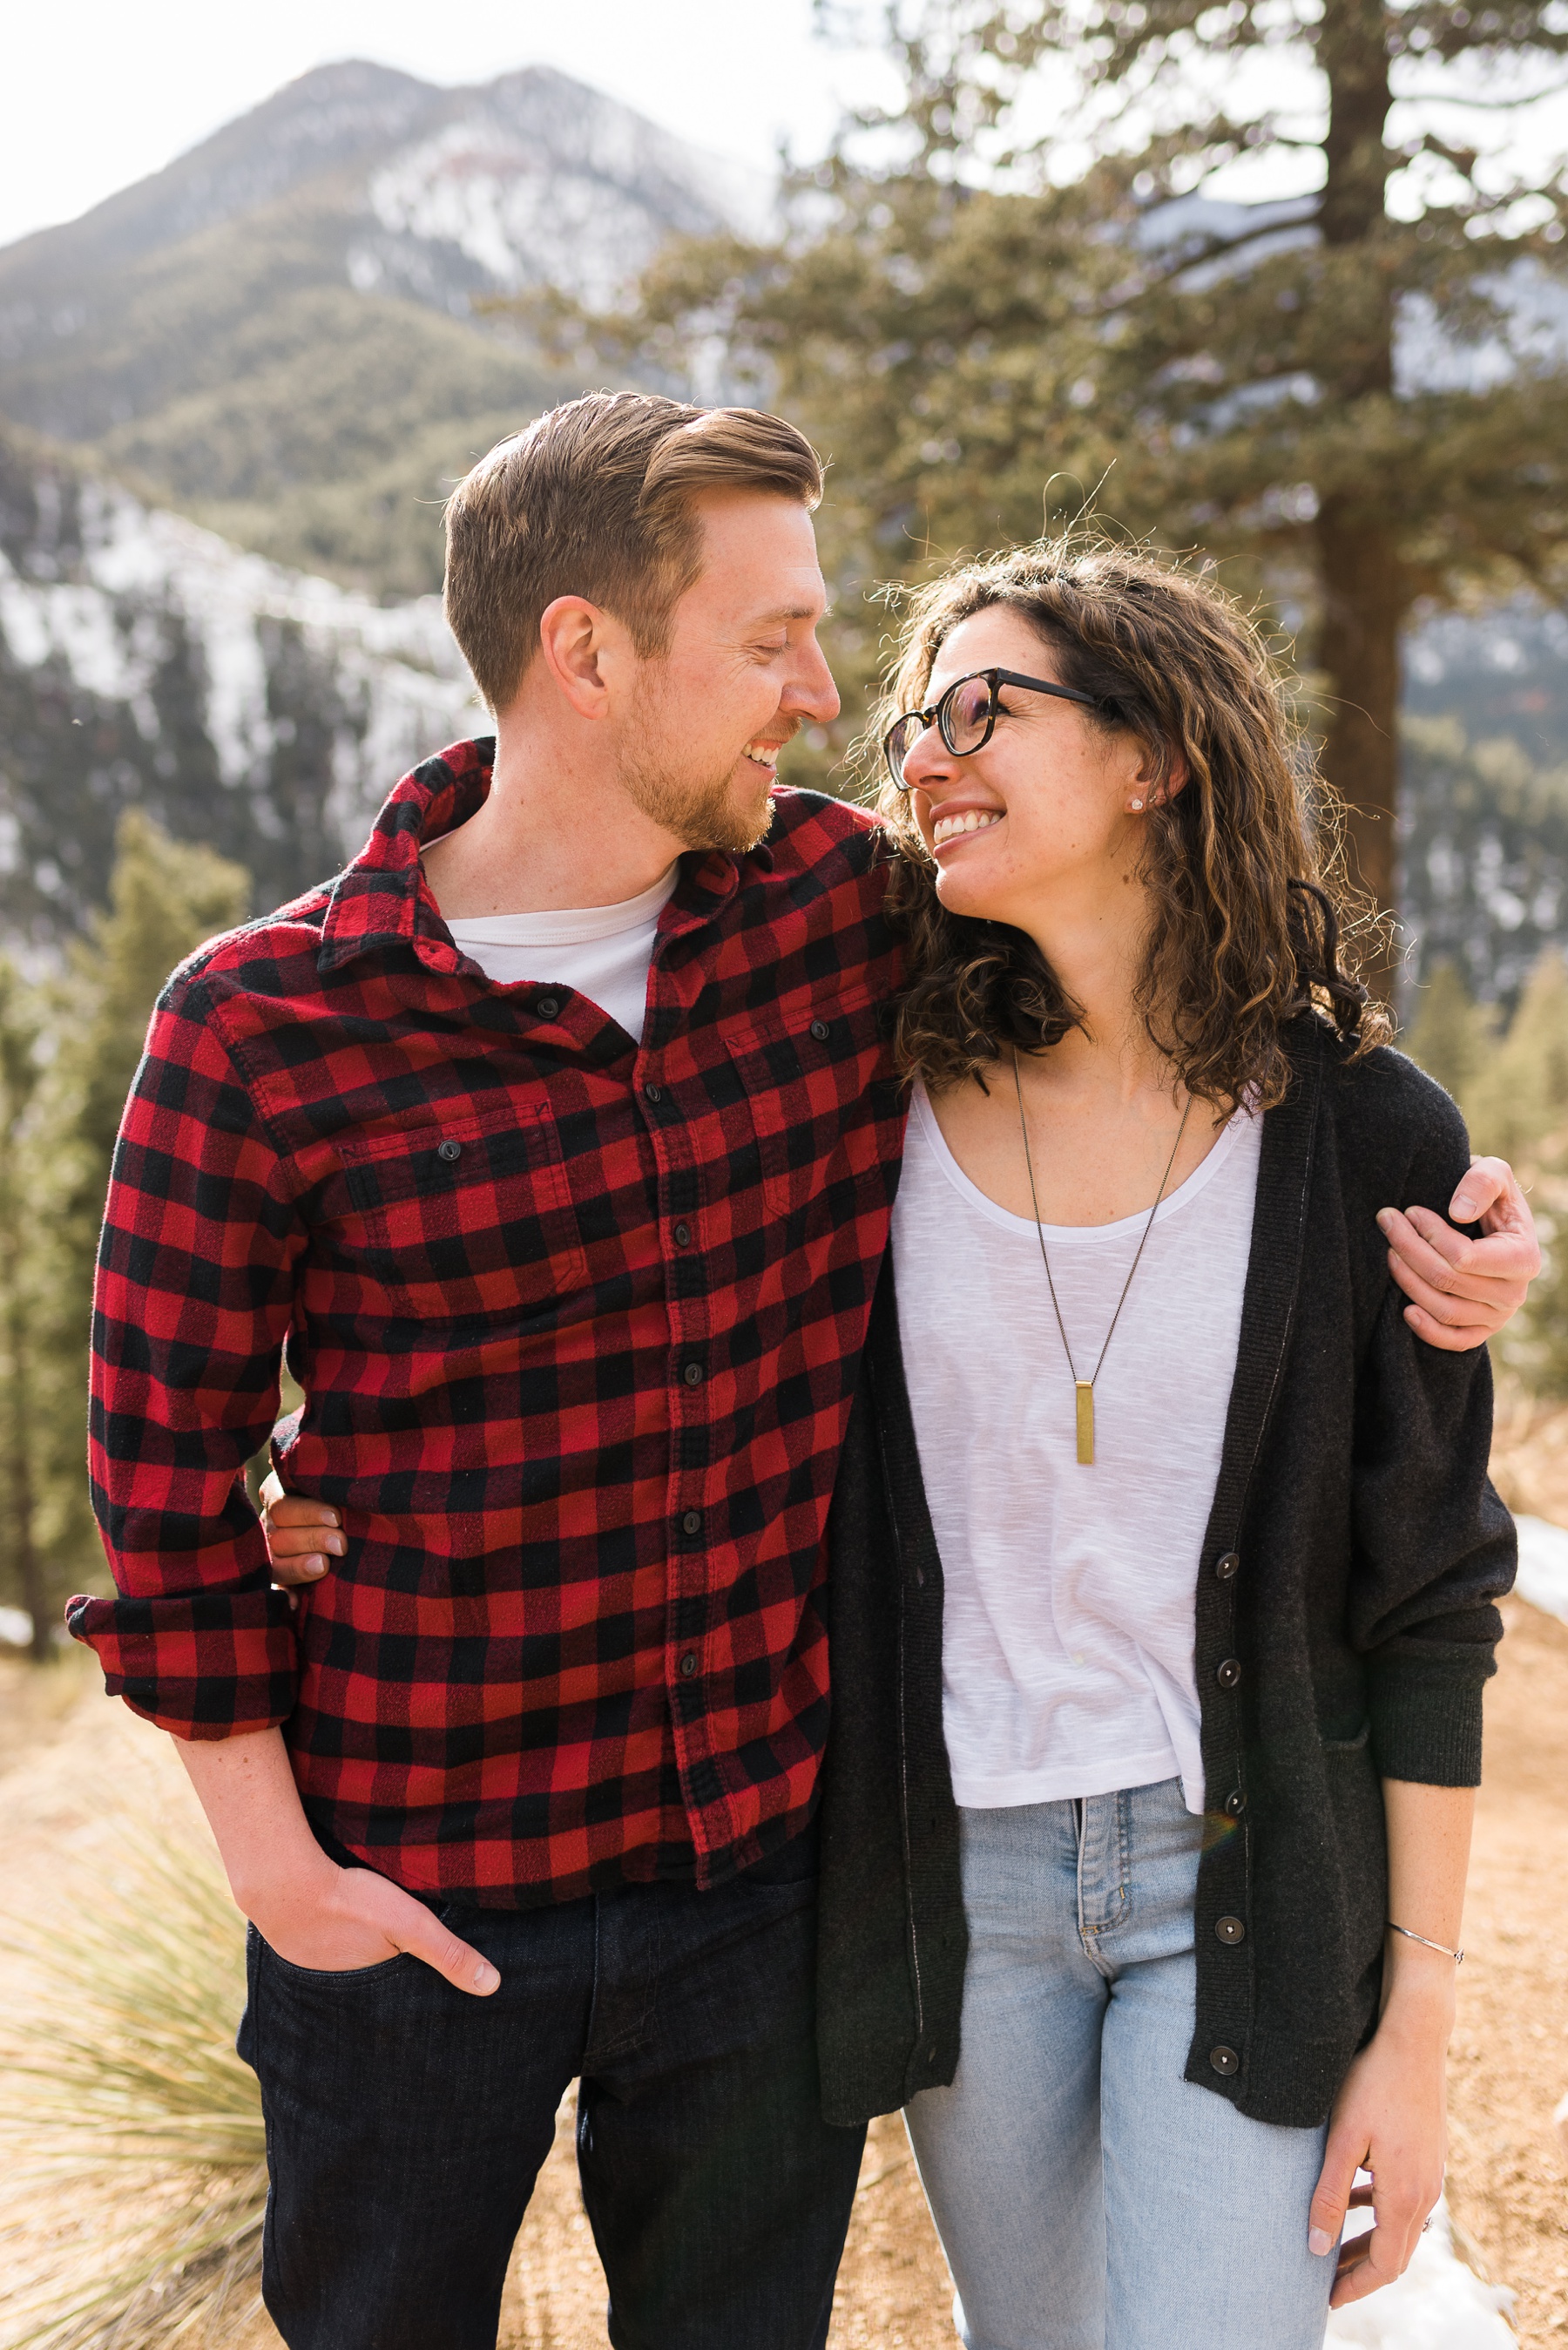 Man in red and black checked shirt and woman in navy blue sweater smiling at each other